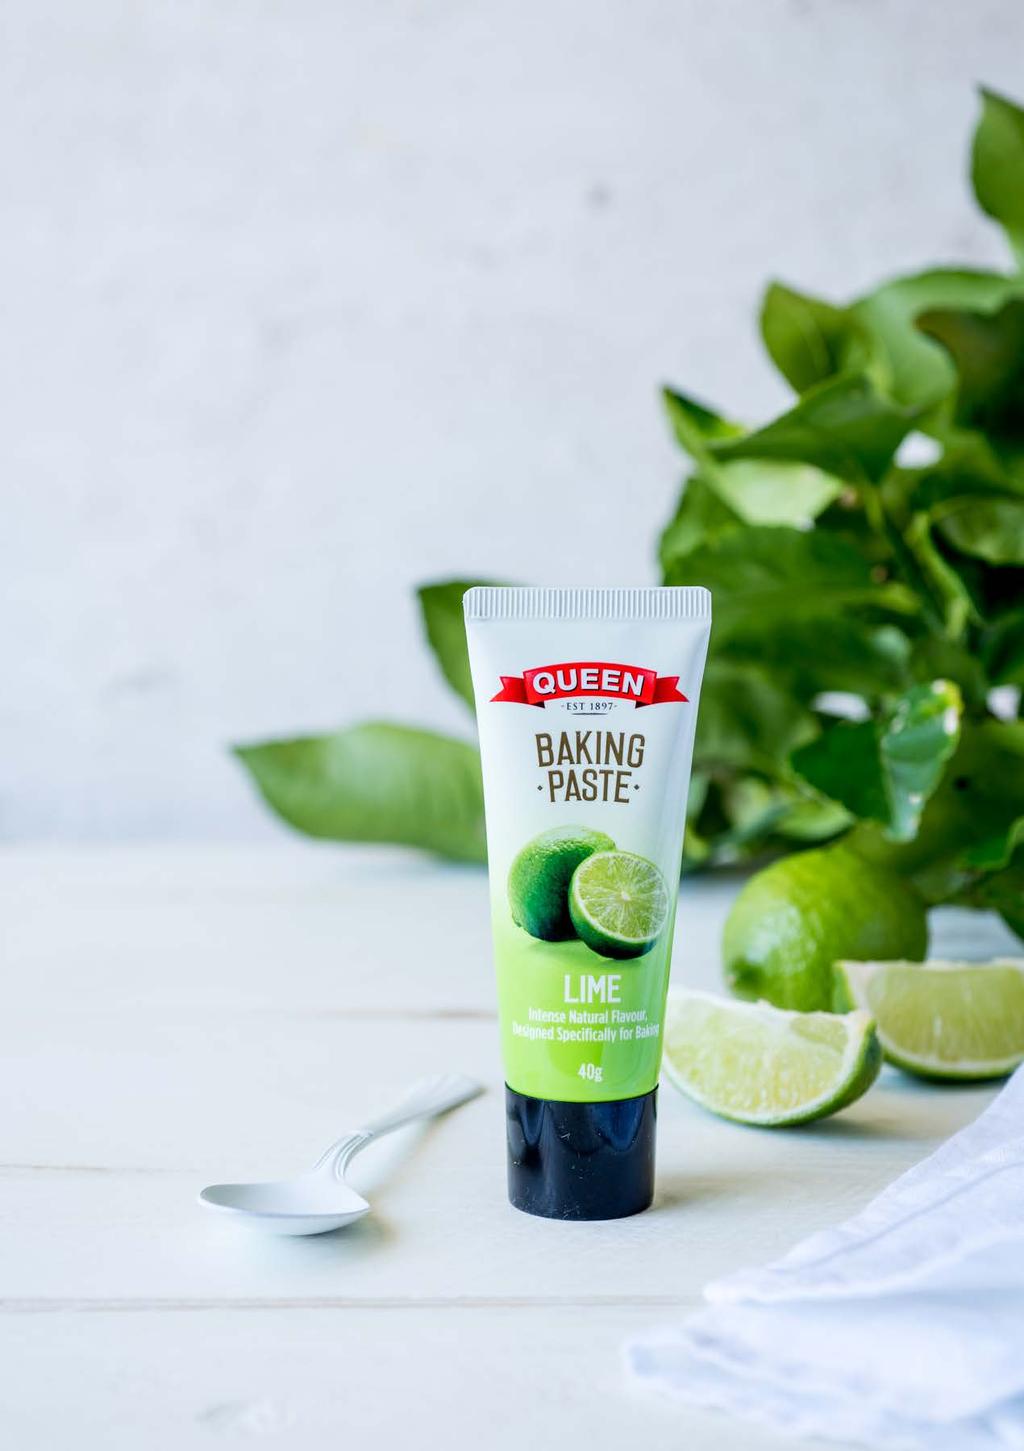 02 Lime Get the citrus kick of tangy lime in pies, cakes and cookies.